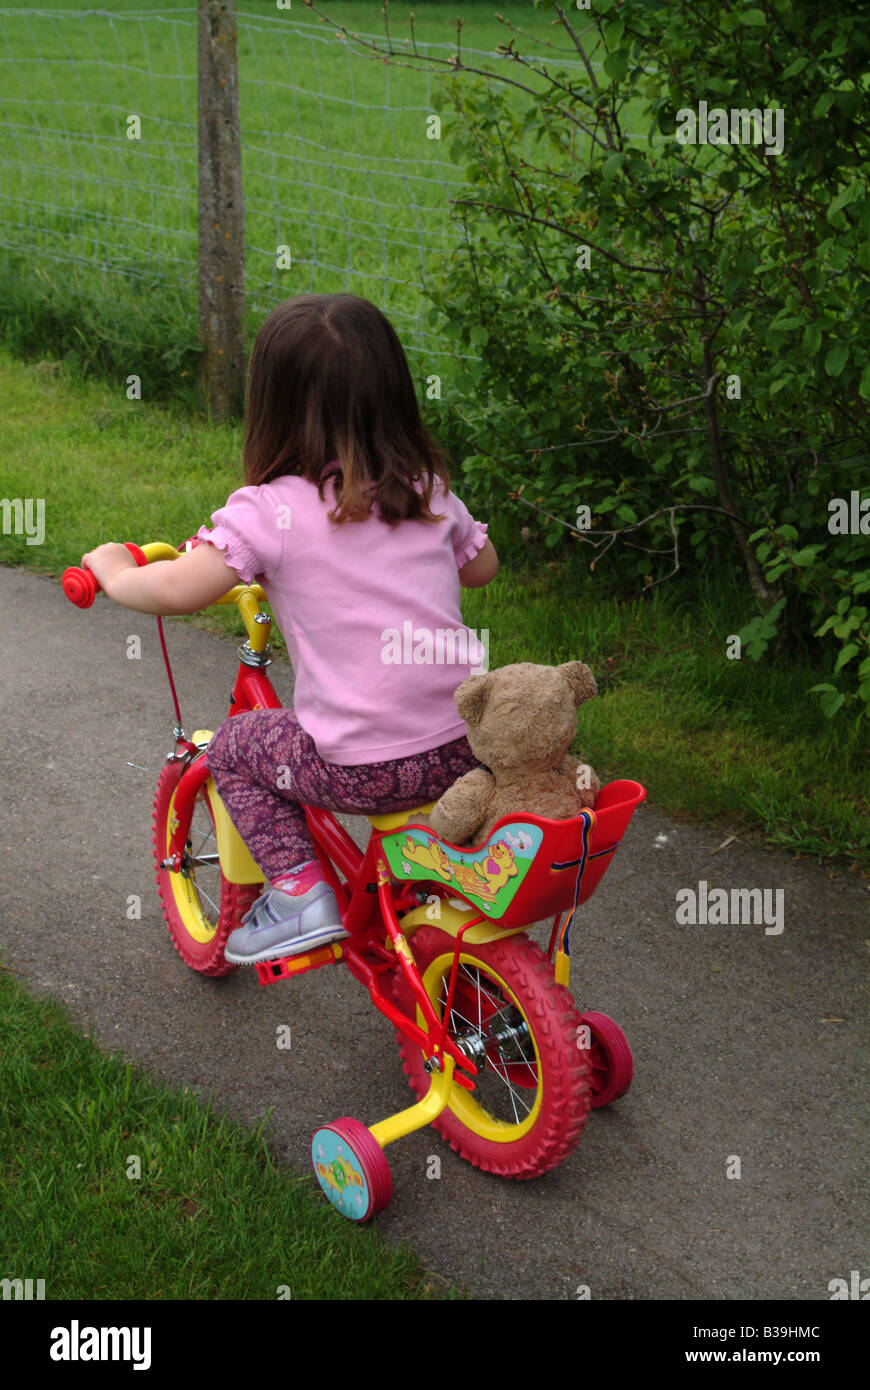 Rear view of a girl cycling with stabilisers Stock Photo